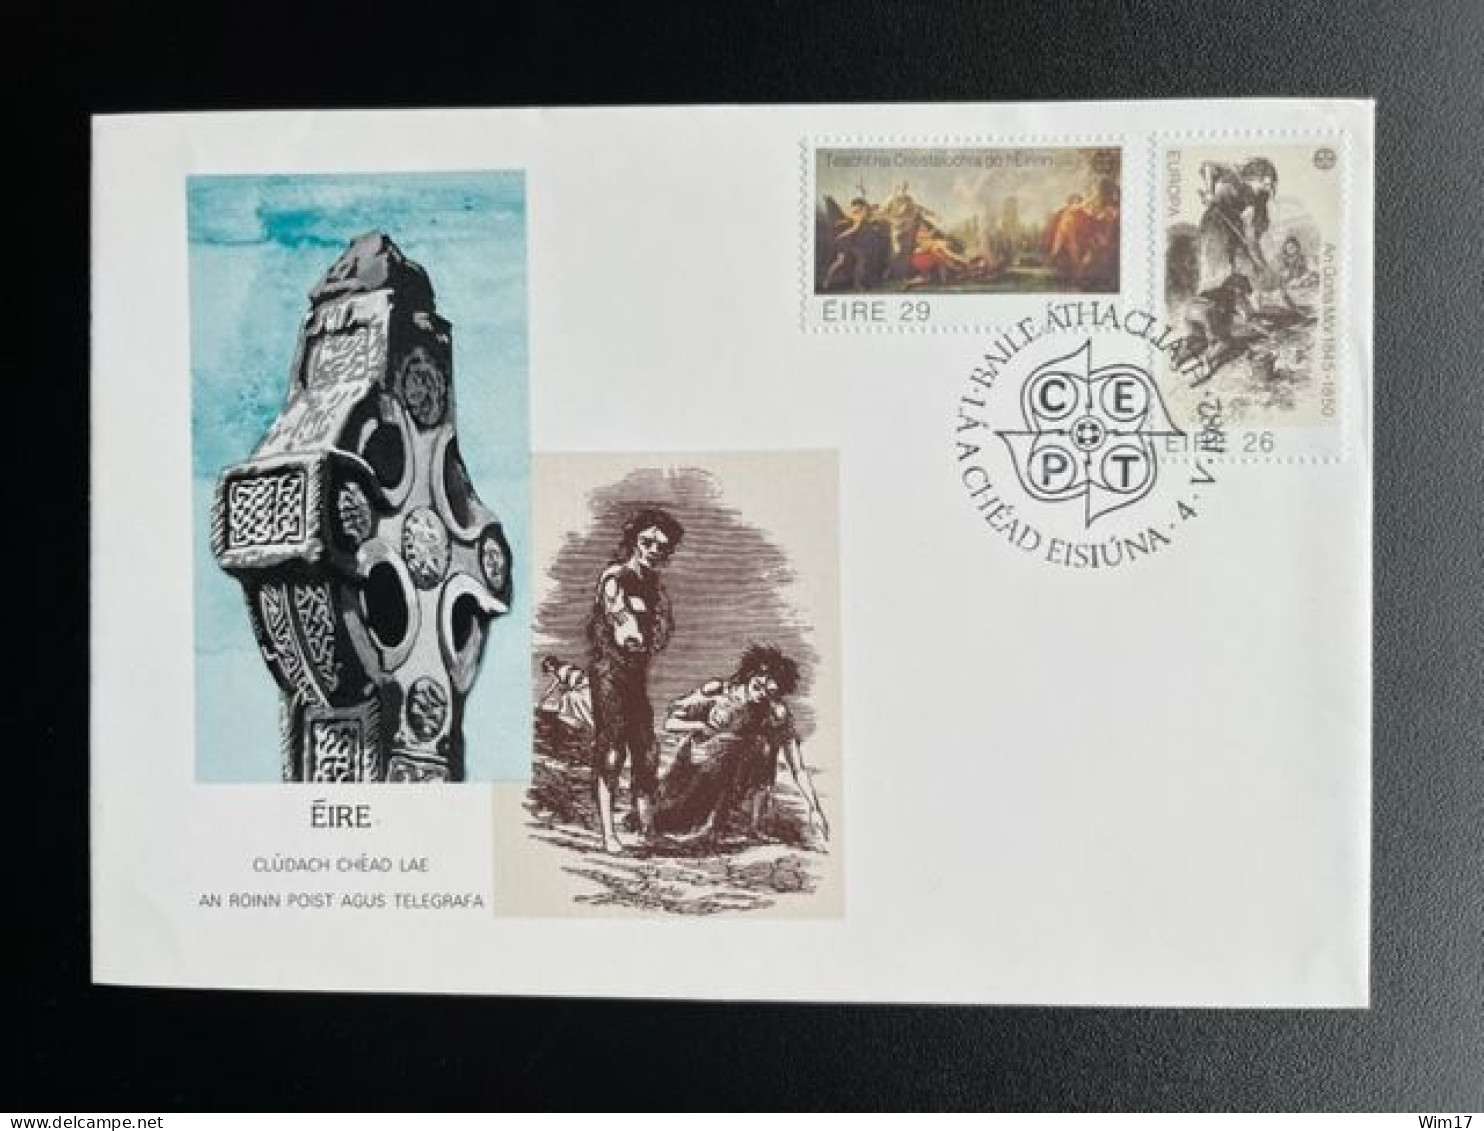 IRELAND EIRE 1982 FDC EUROPA CEPT HISTORIC EVENTS 04-05-1982 IERLAND - FDC